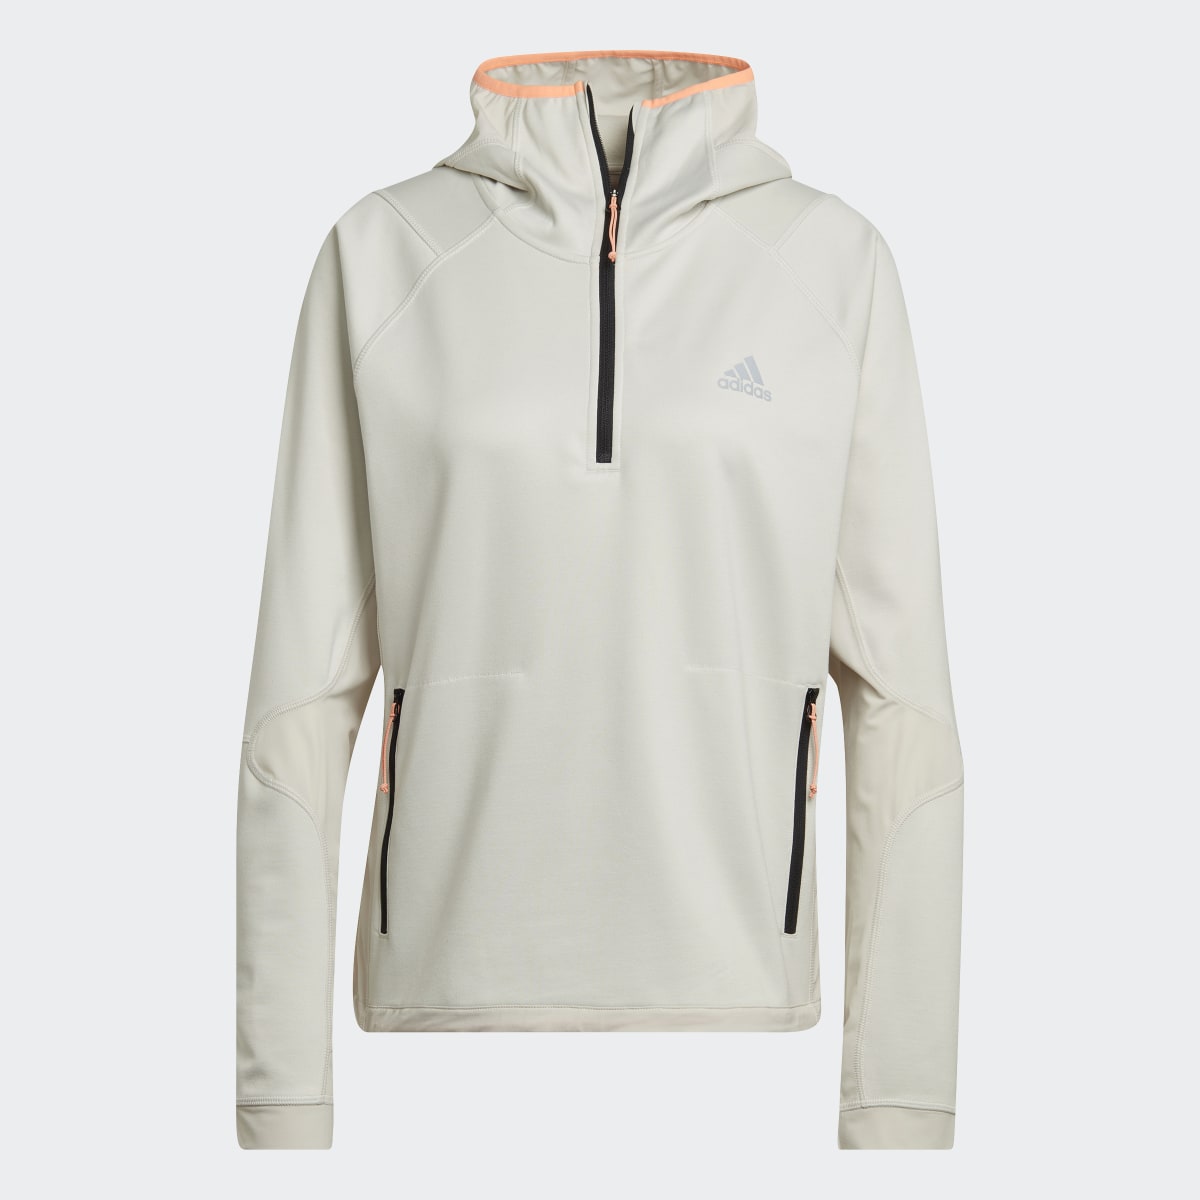 Adidas X-City COLD.RDY Running Cover-Up. 5